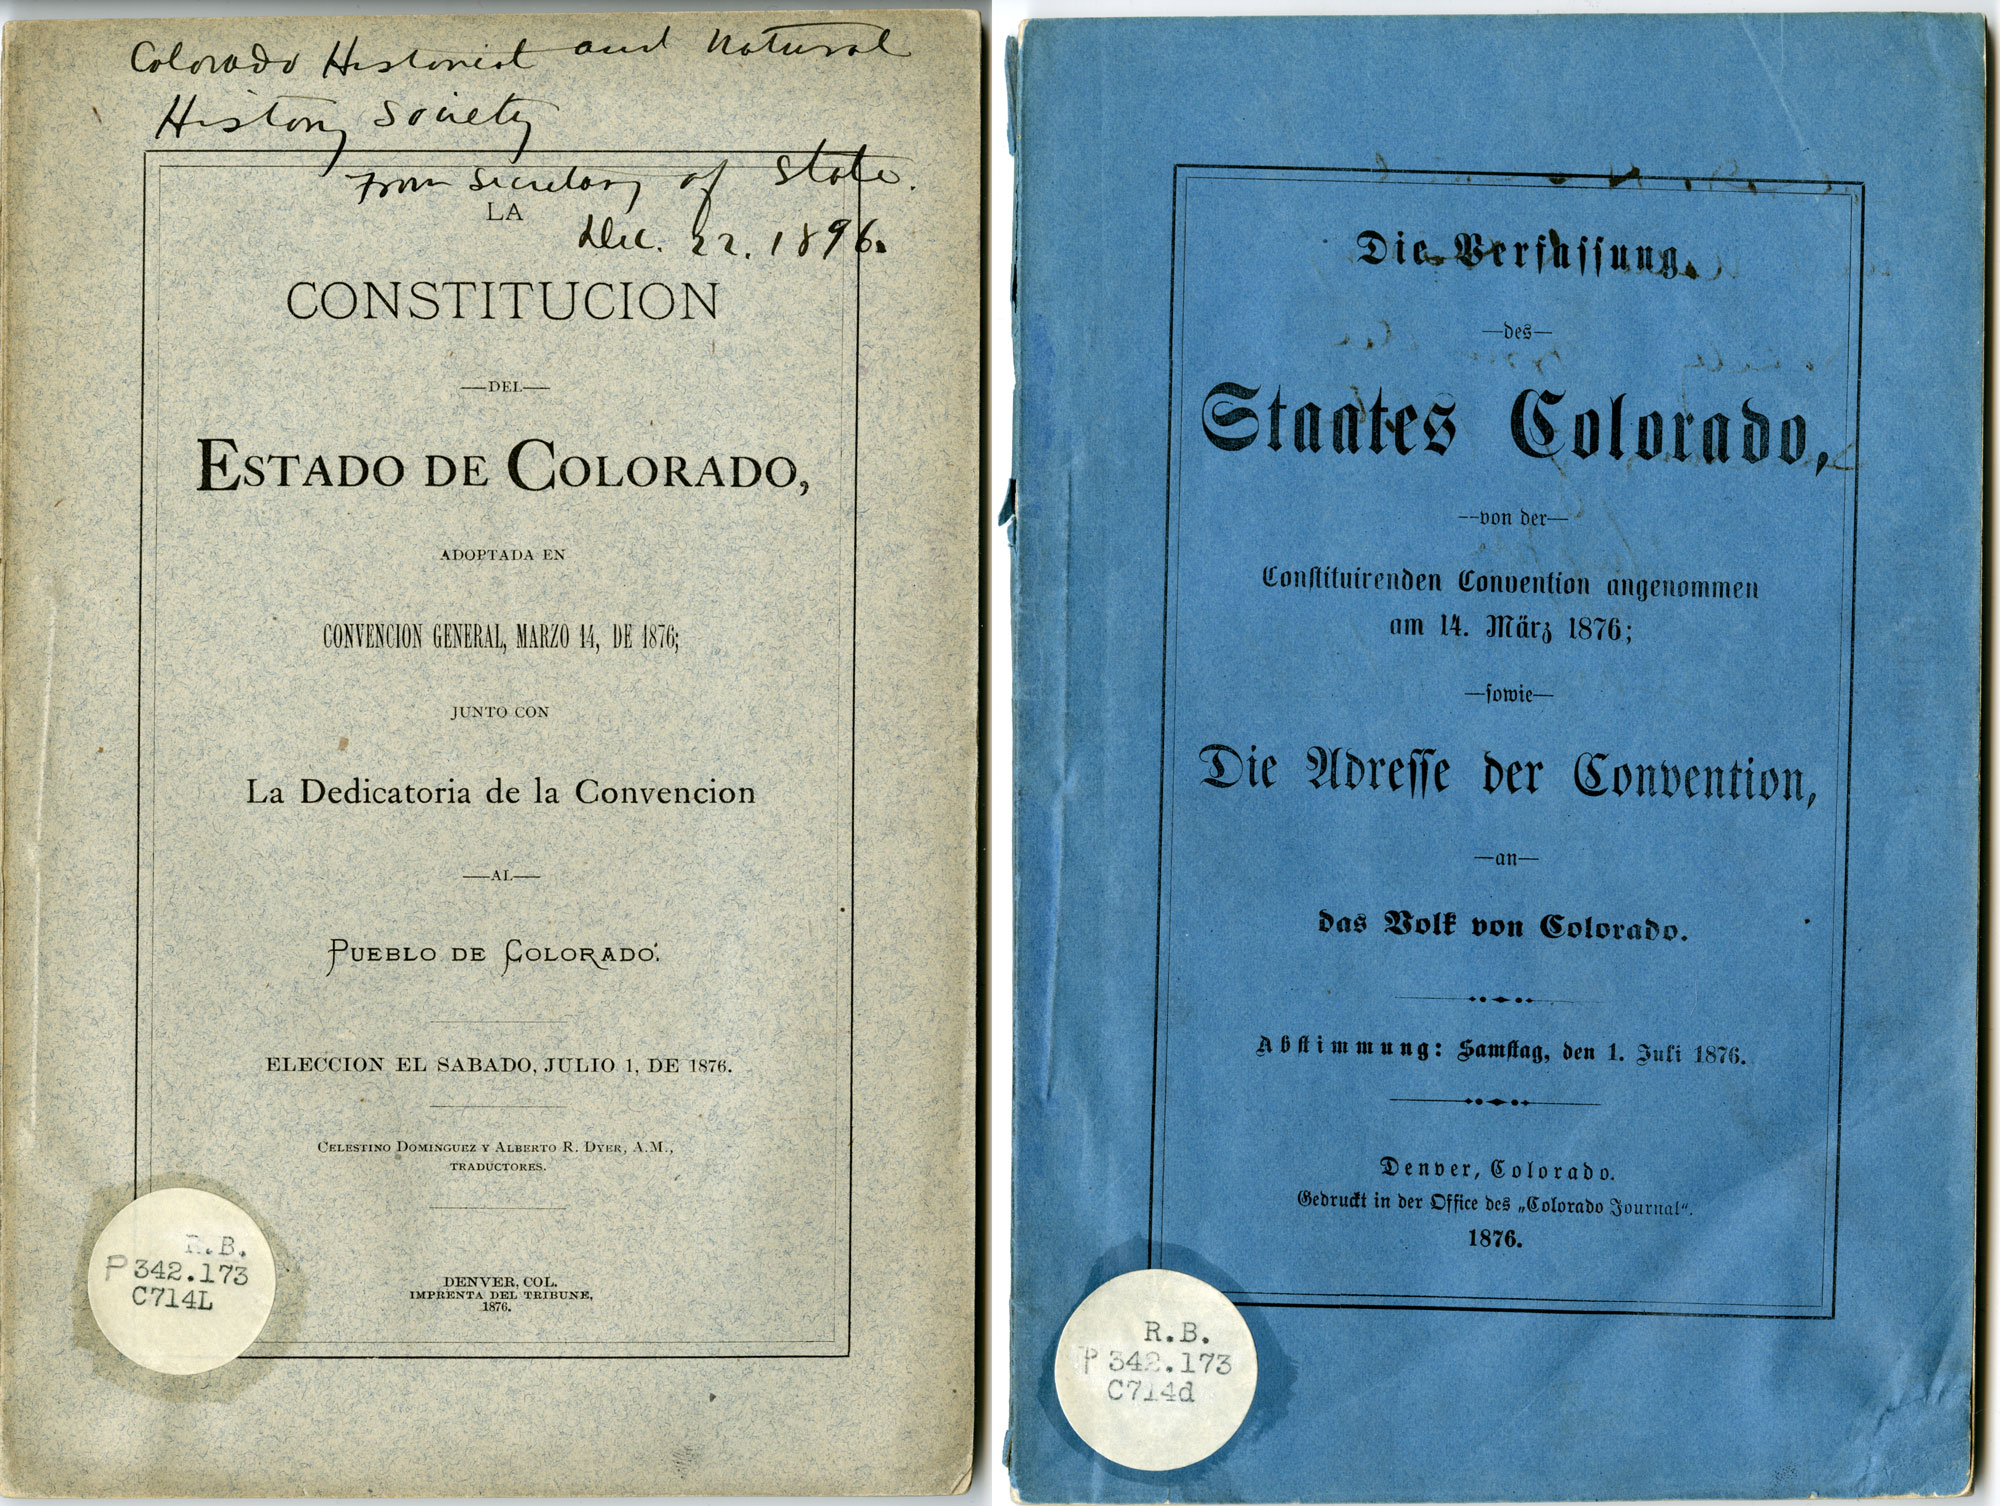 Covers of Spanish and German versions of Colorado Constitution